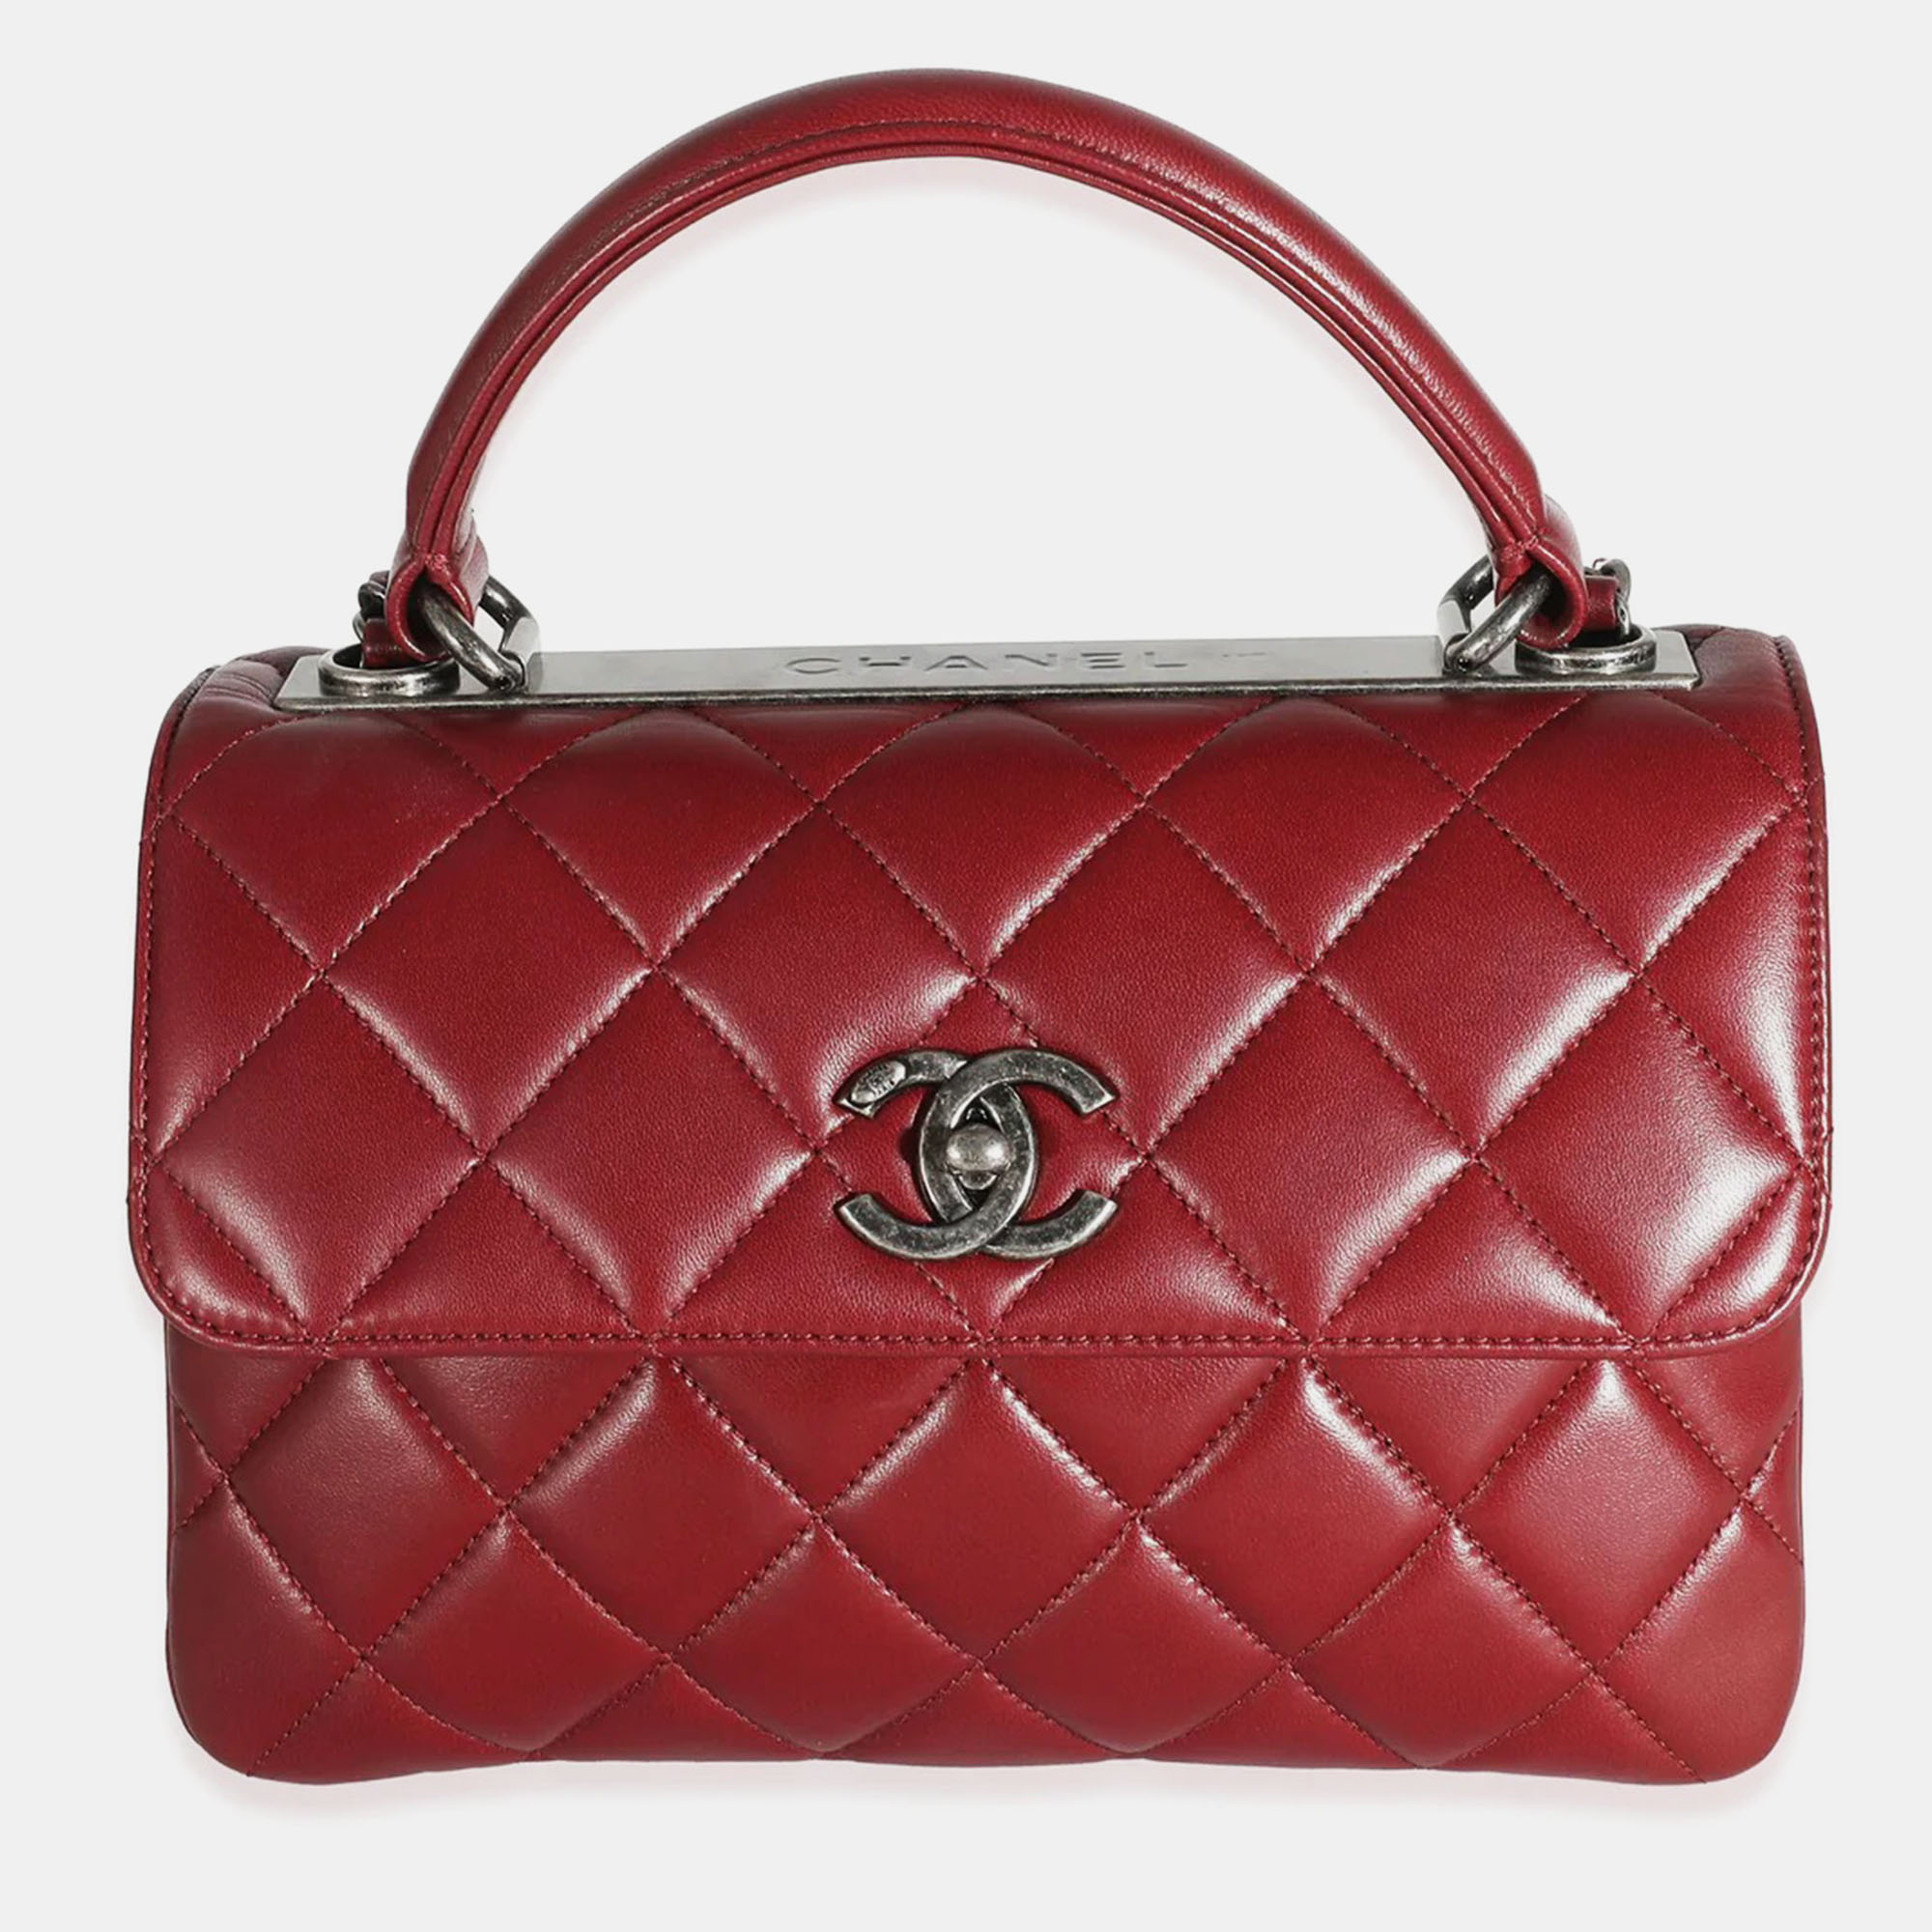 Chanel burgundy quilted lambskin small trendy flap bag